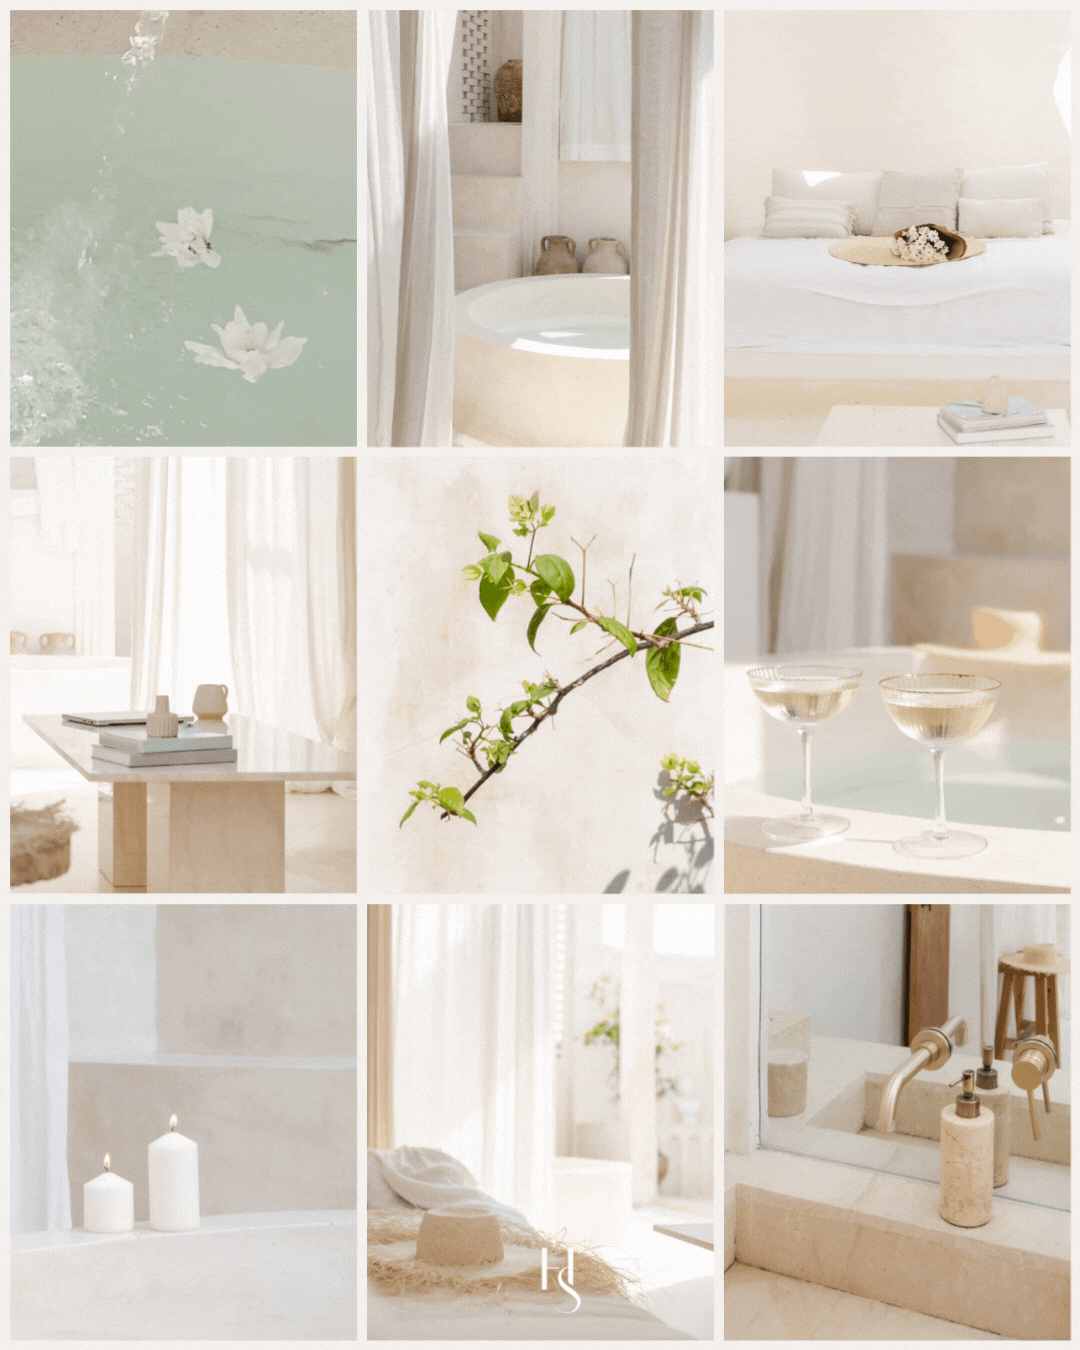 Bali Breeze, a collection of a airy and soothing videos & images of a Bali villa with earthy architectural designs and poolside sips, perfect for interior design, travel brands and more!